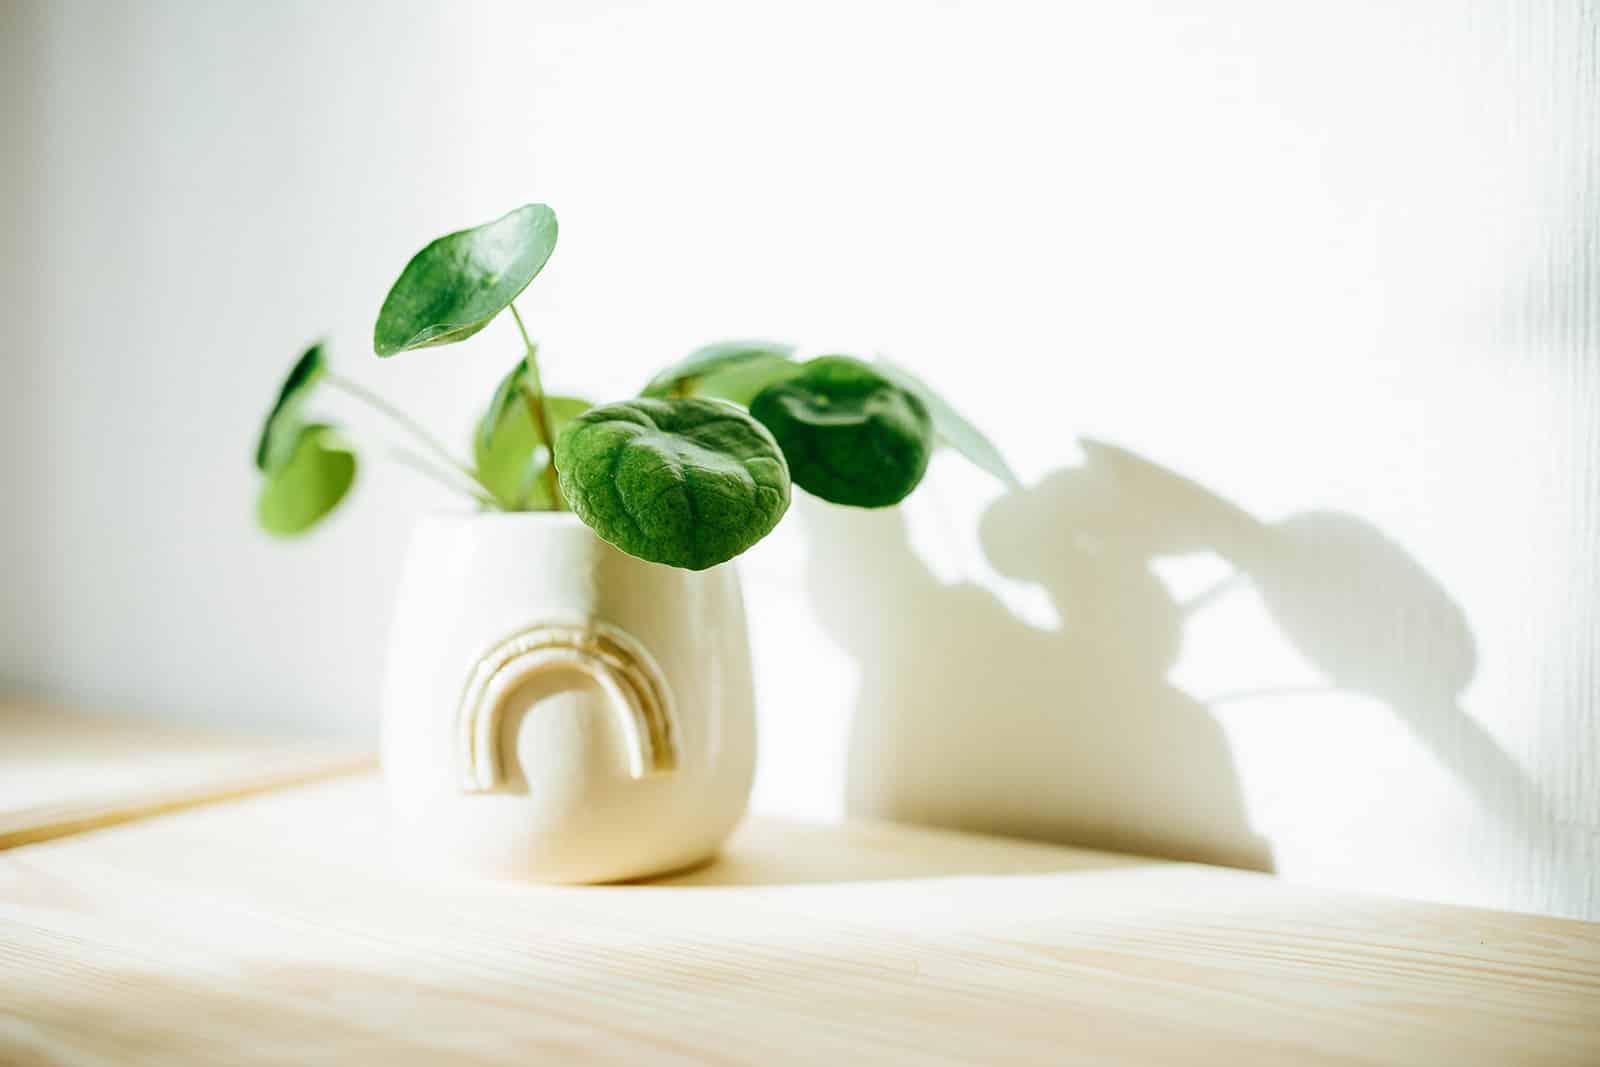 Baby Pilea (Chinese money plant) in a white ceramic vase against a white backdrop with subtle shadows